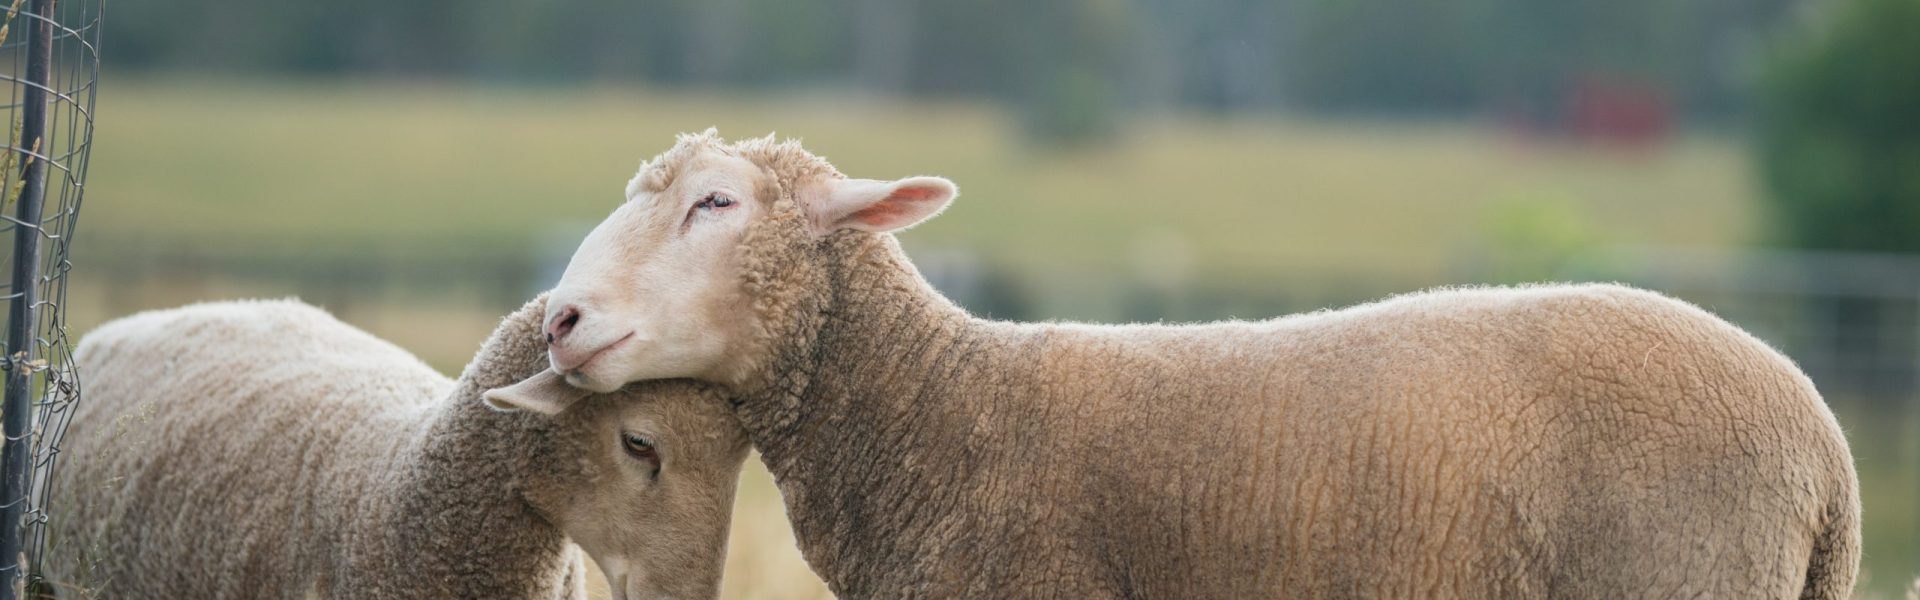 Two sheep in a grassy field touch their heads together affectionately.